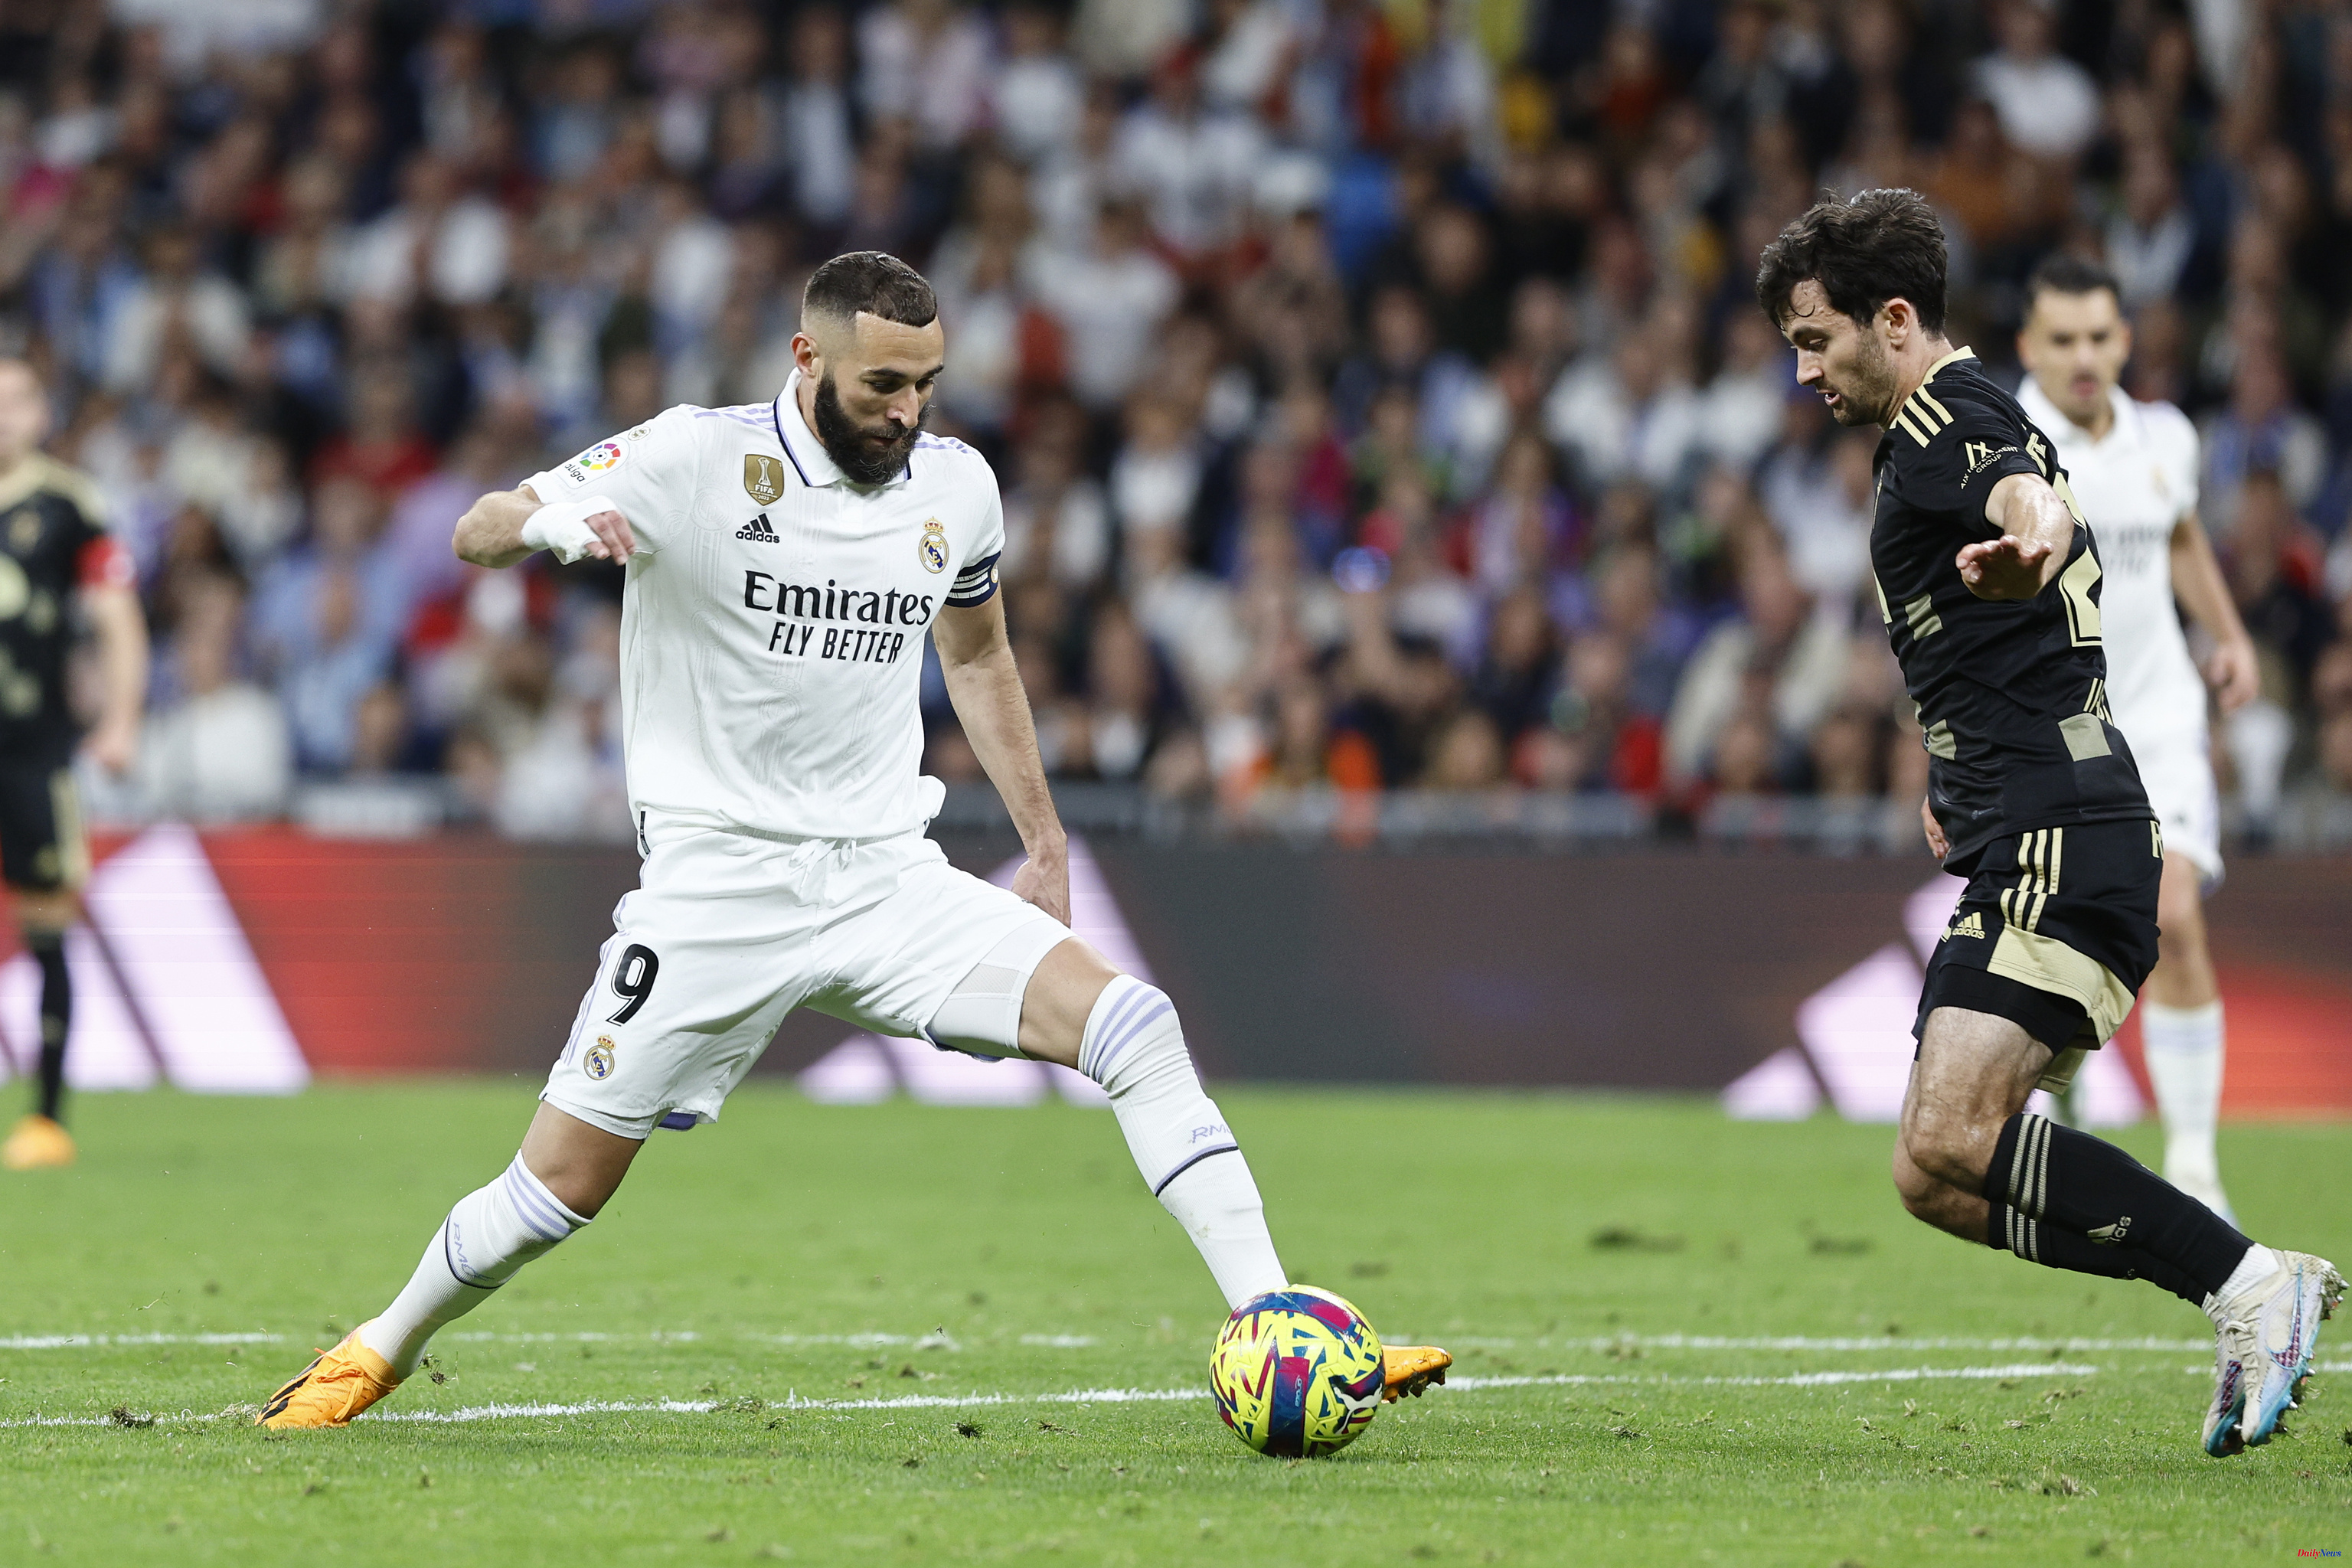 Sports Real Madrid - Almería: schedule and where to watch the League game on TV